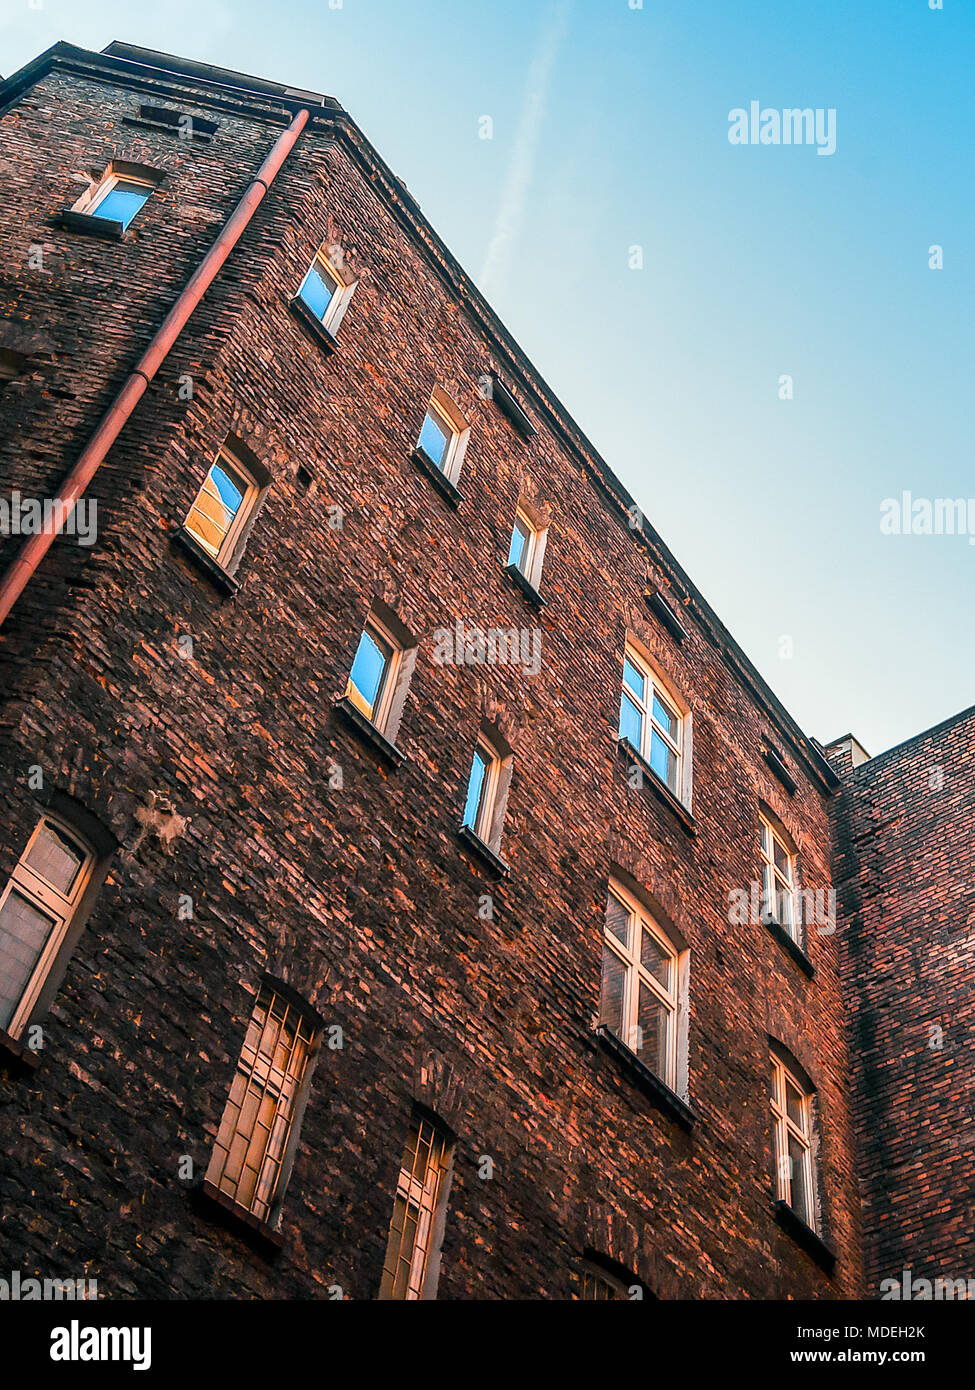 Zoom at the courtyard of an old red brick tenements house in the center of Katowice, Silesia, Poland. Stock Photo